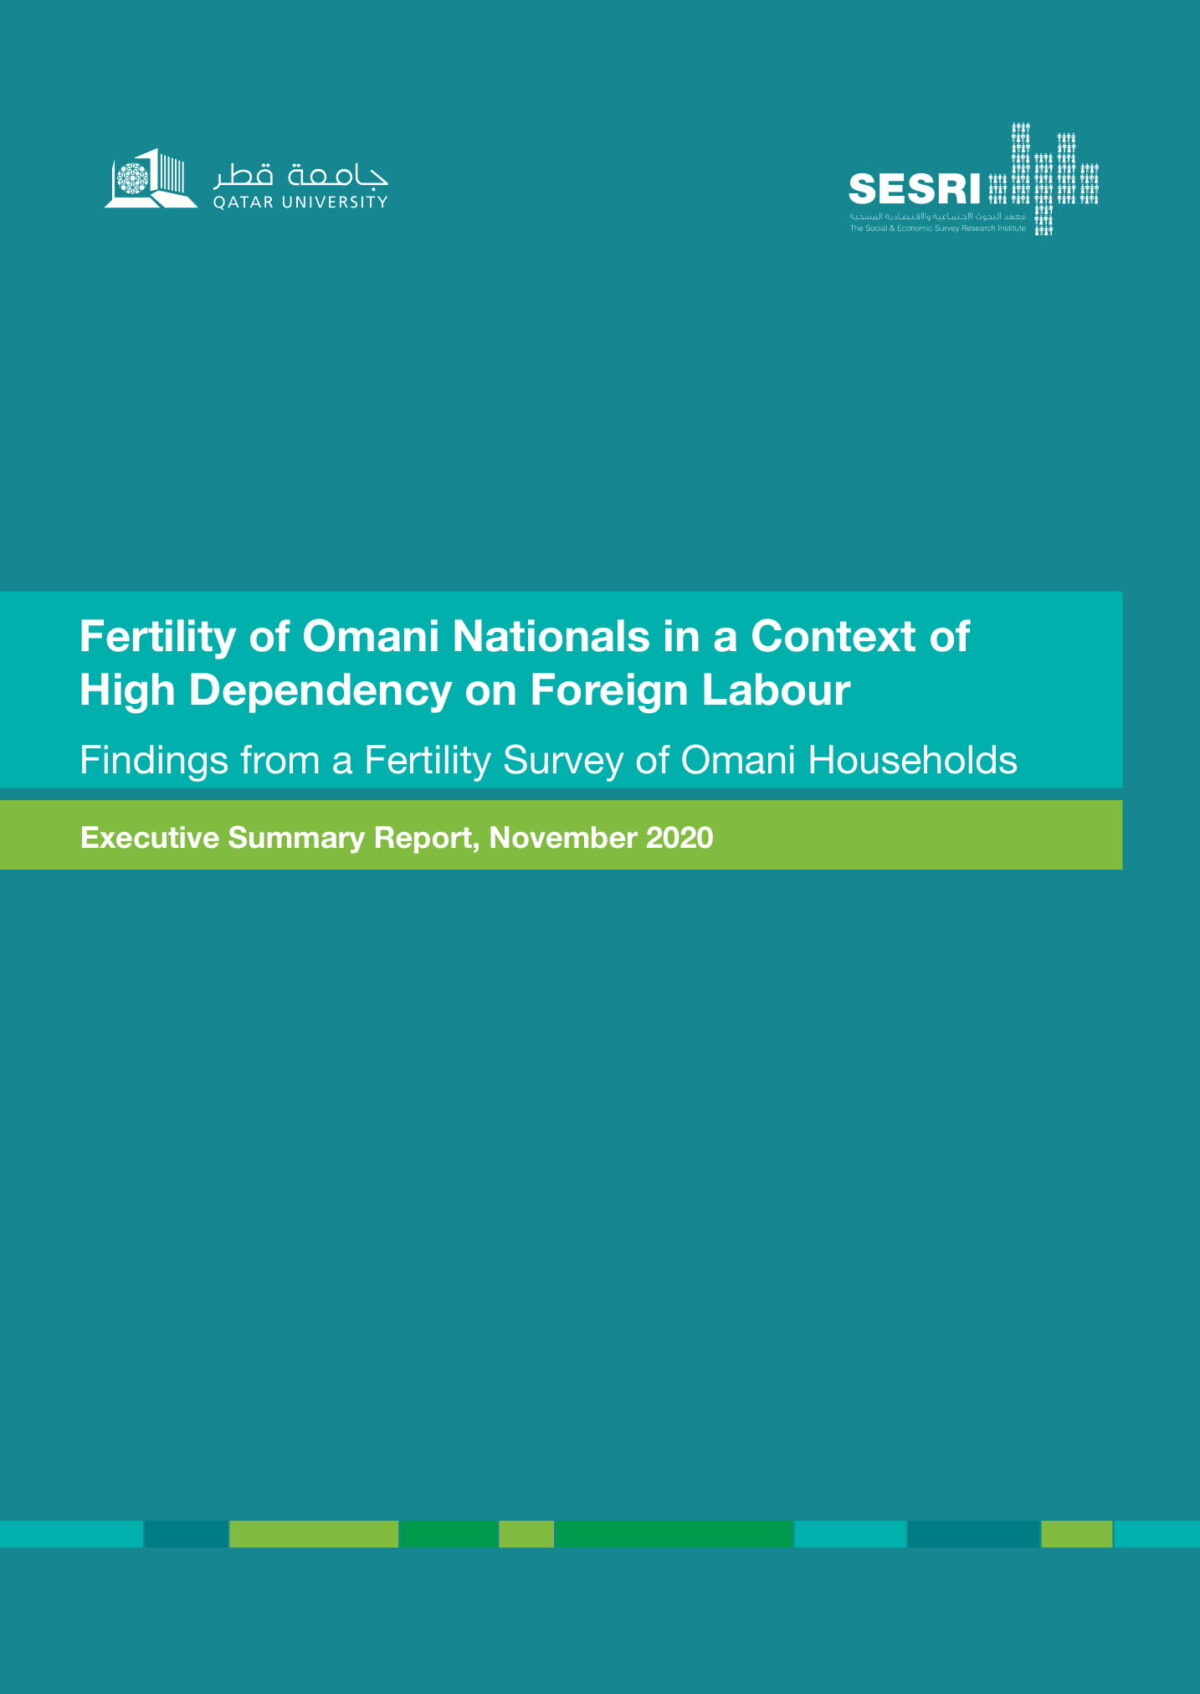 Fertility of Omani Nationals in a Context of High Dependency on Foreign Labour